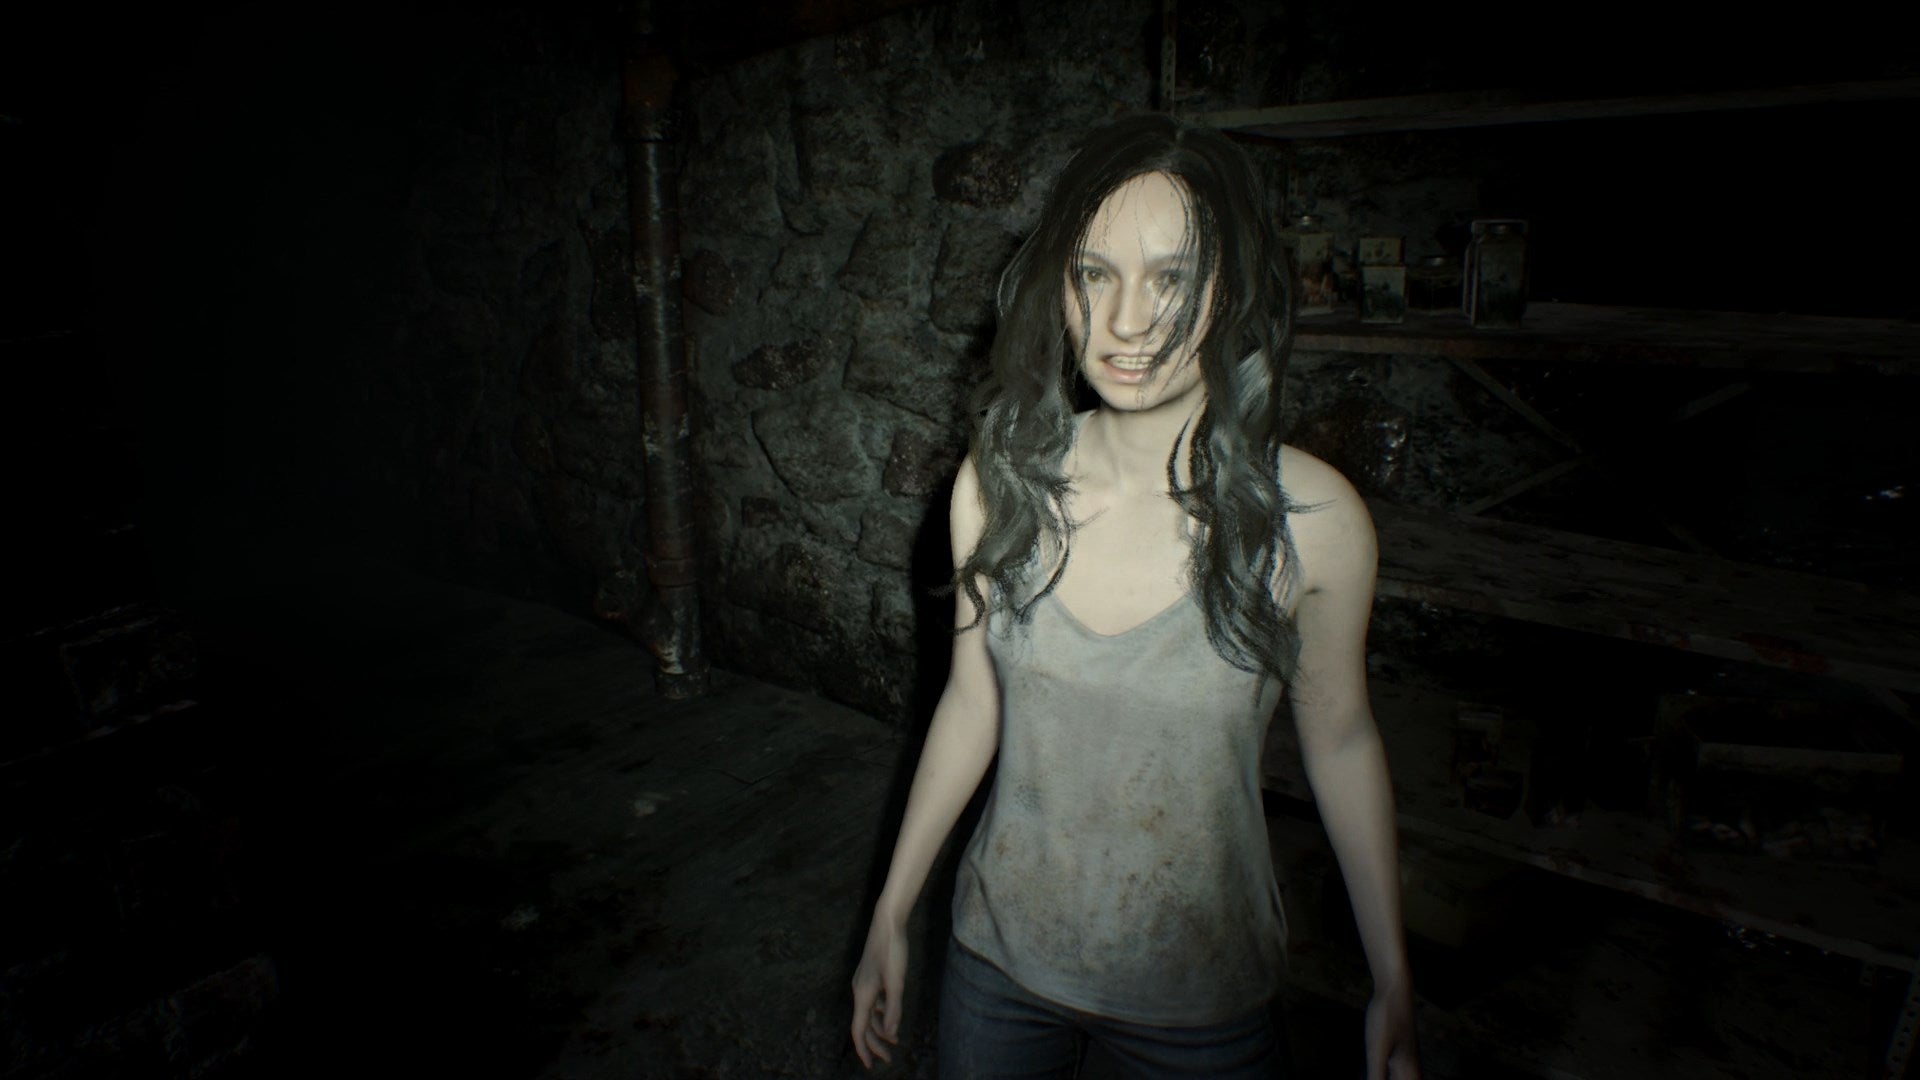 Image for Resident Evil 7 cracked on PC in record 5 days